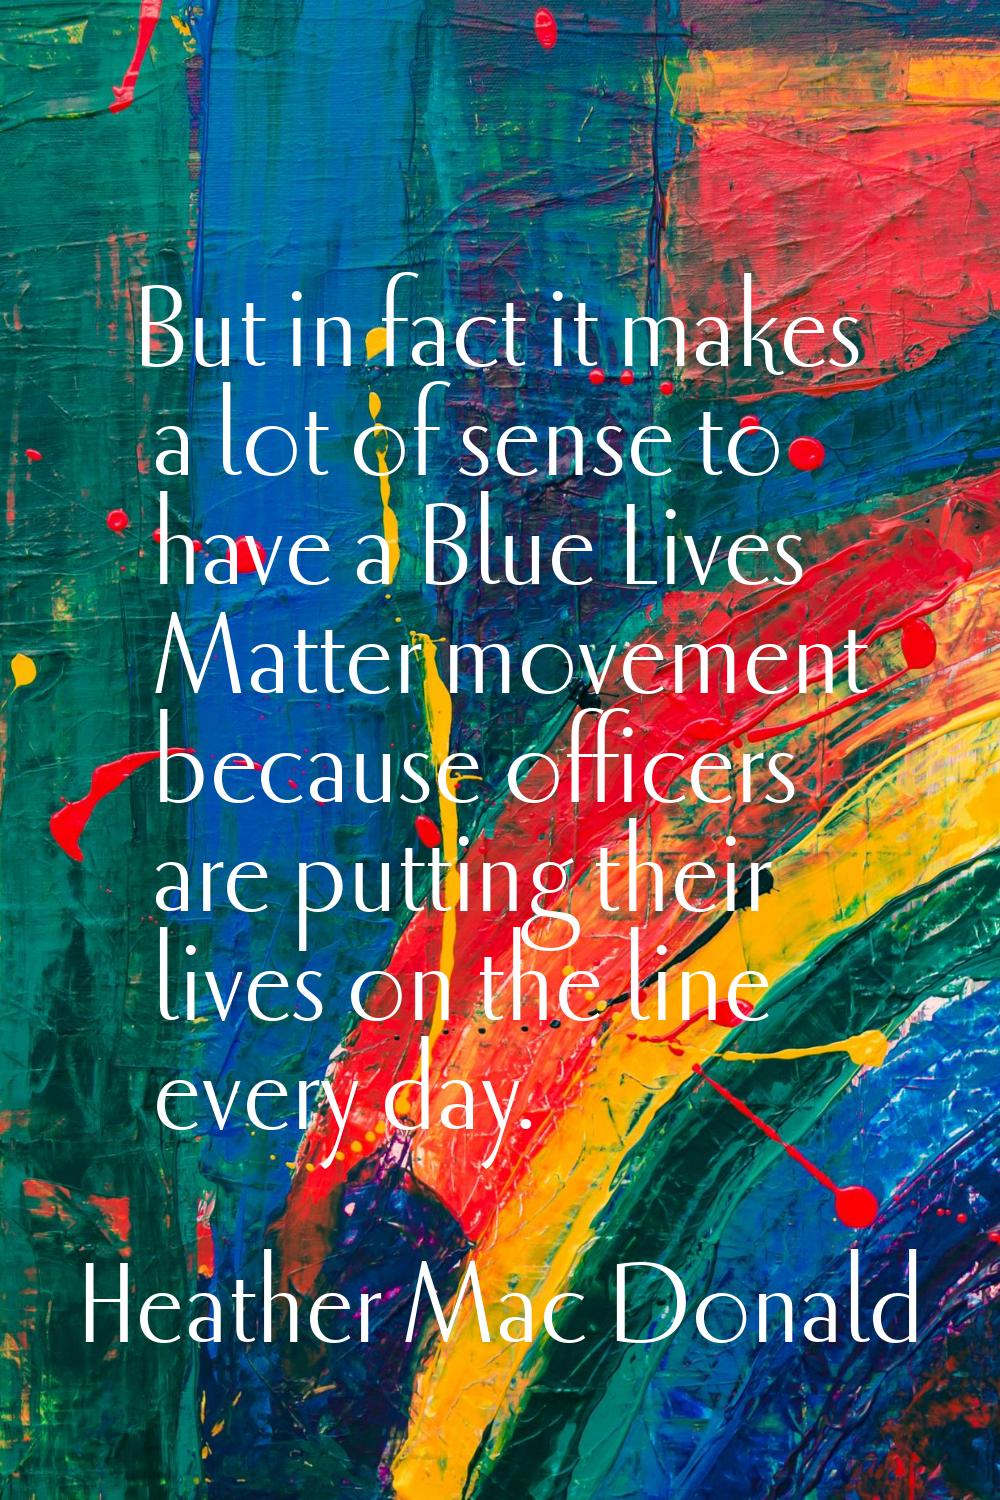 But in fact it makes a lot of sense to have a Blue Lives Matter movement because officers are putti